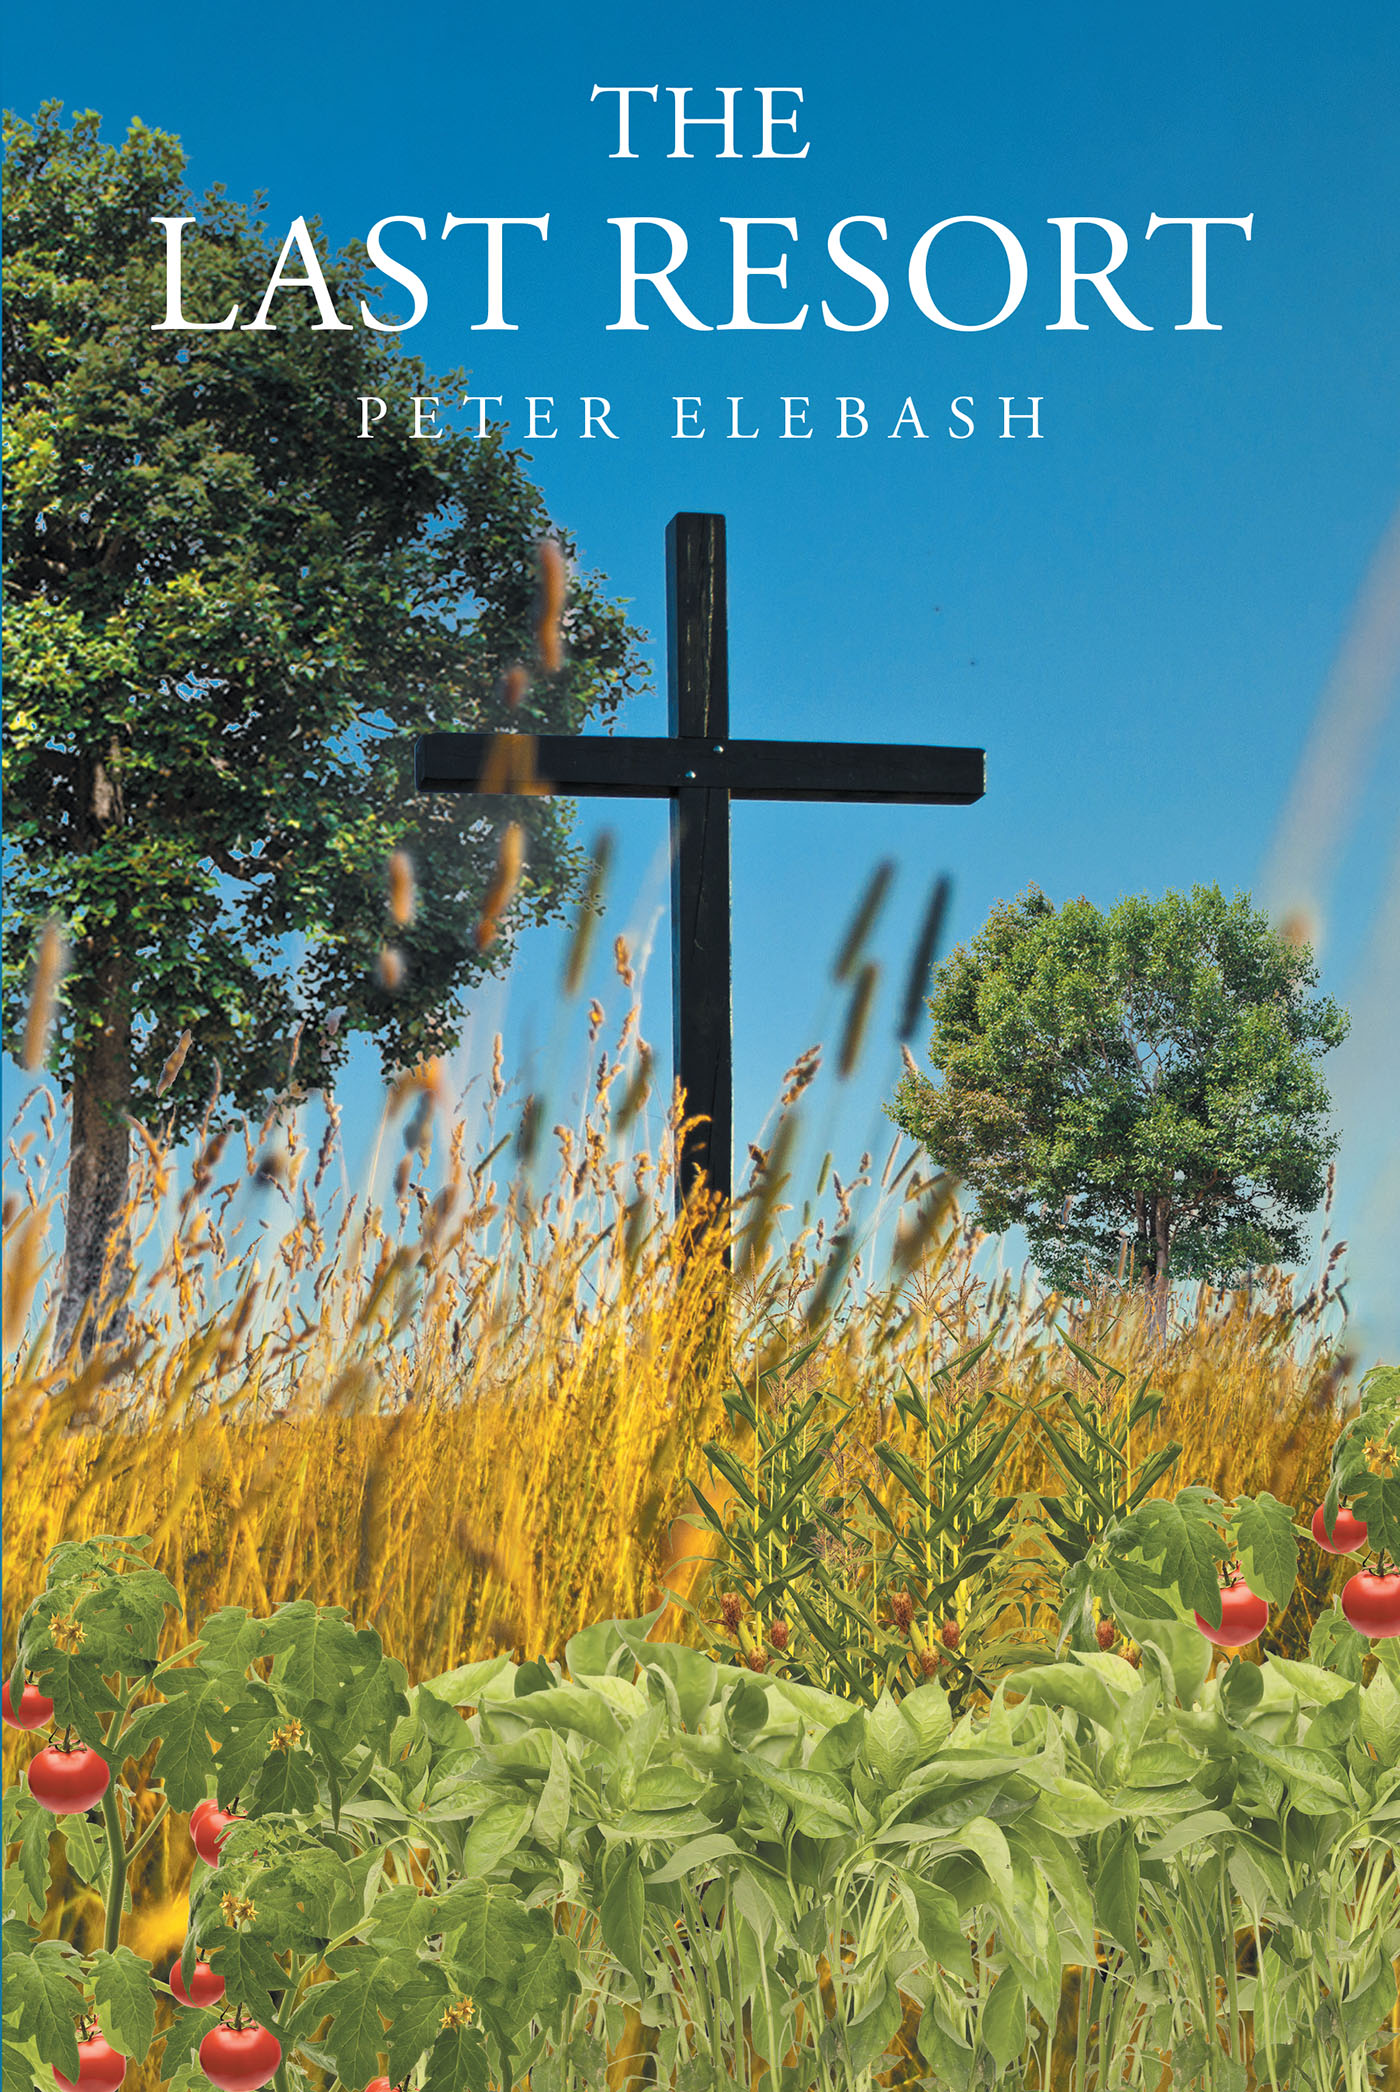 Peter Elebash’s New Book, "The Last Resort," is an Entertaining and Compelling True Story That Follows One Man’s Eclectic and Fascinating Life Journey